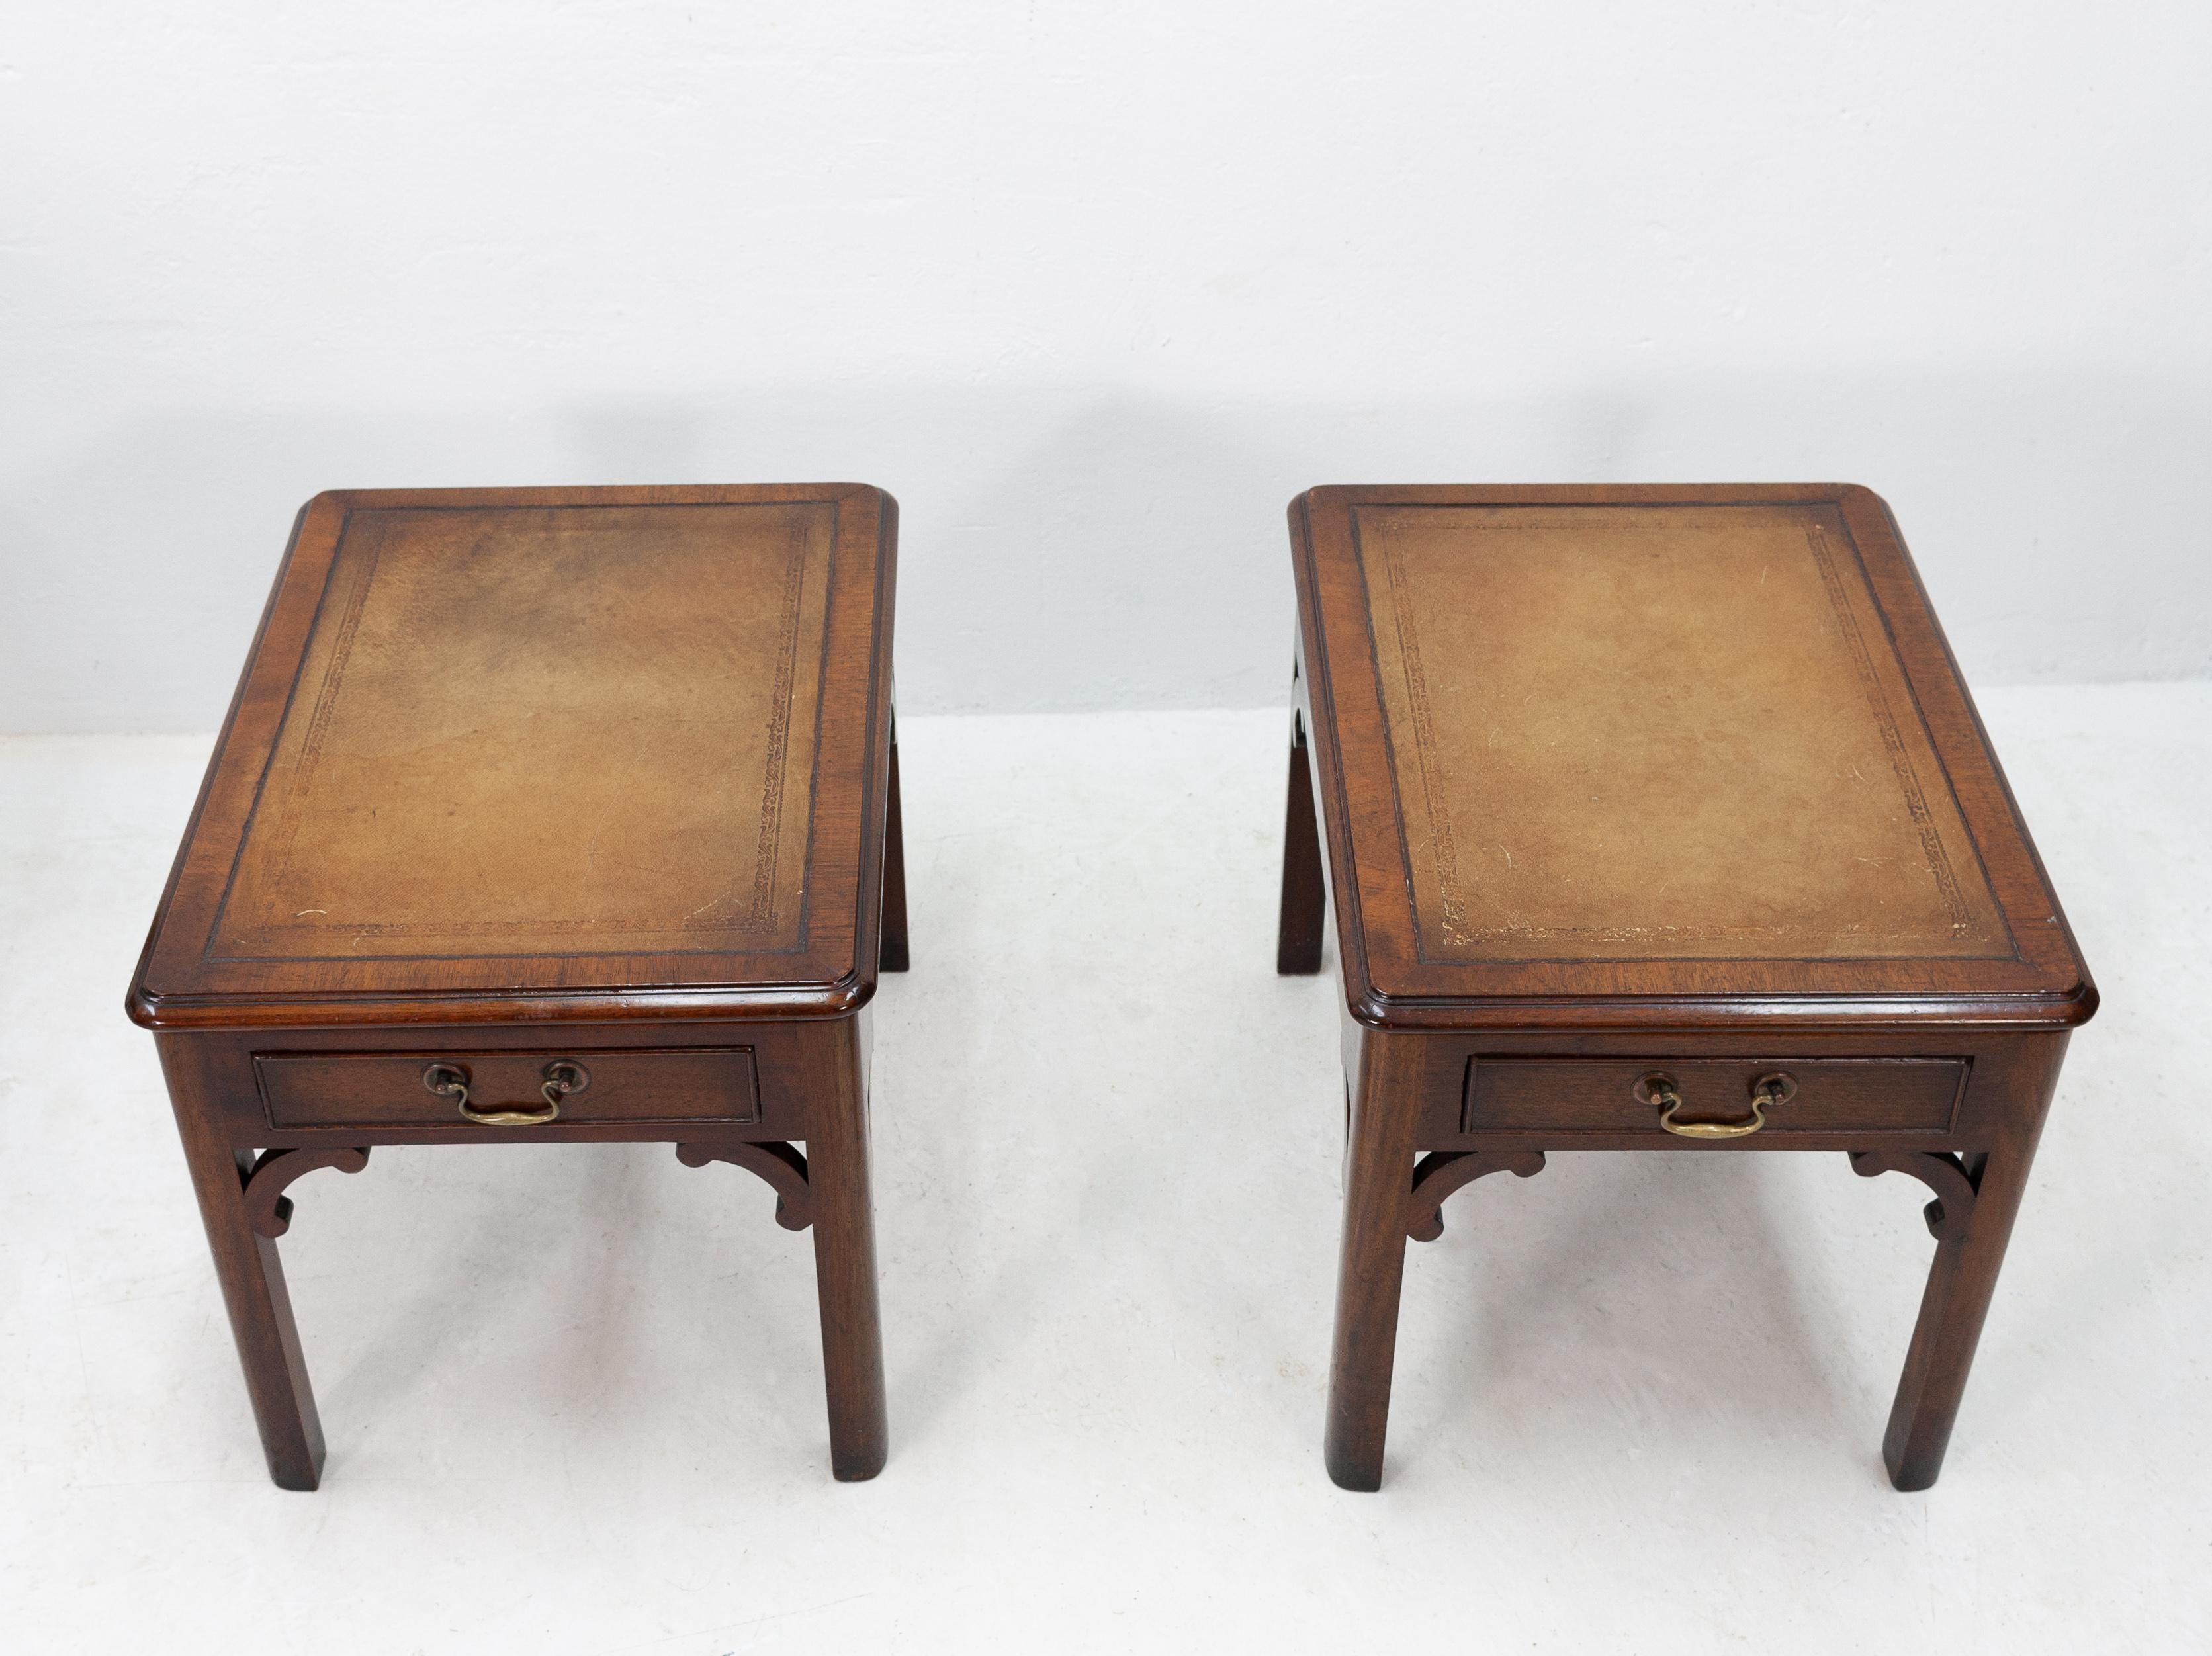 Two superb end tables or nightstands. England 1960. Solid mahogany tables, with a camel color leather top. Very good condition. Warm colors. Good quality furniture.

   